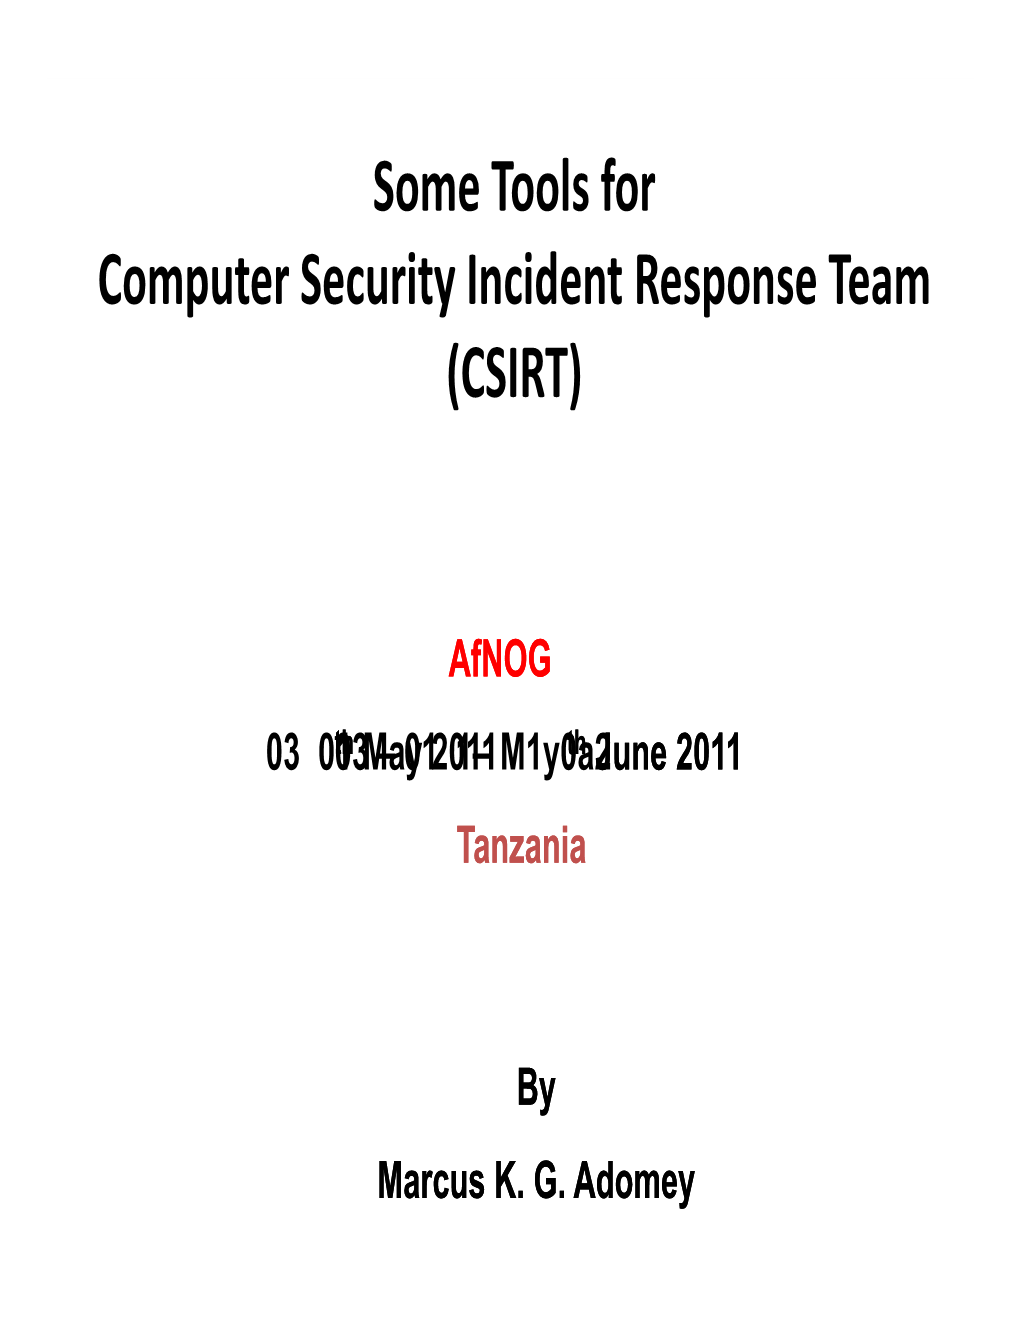 Some Tools for Computer Security Incident Response Team (CSIRT)